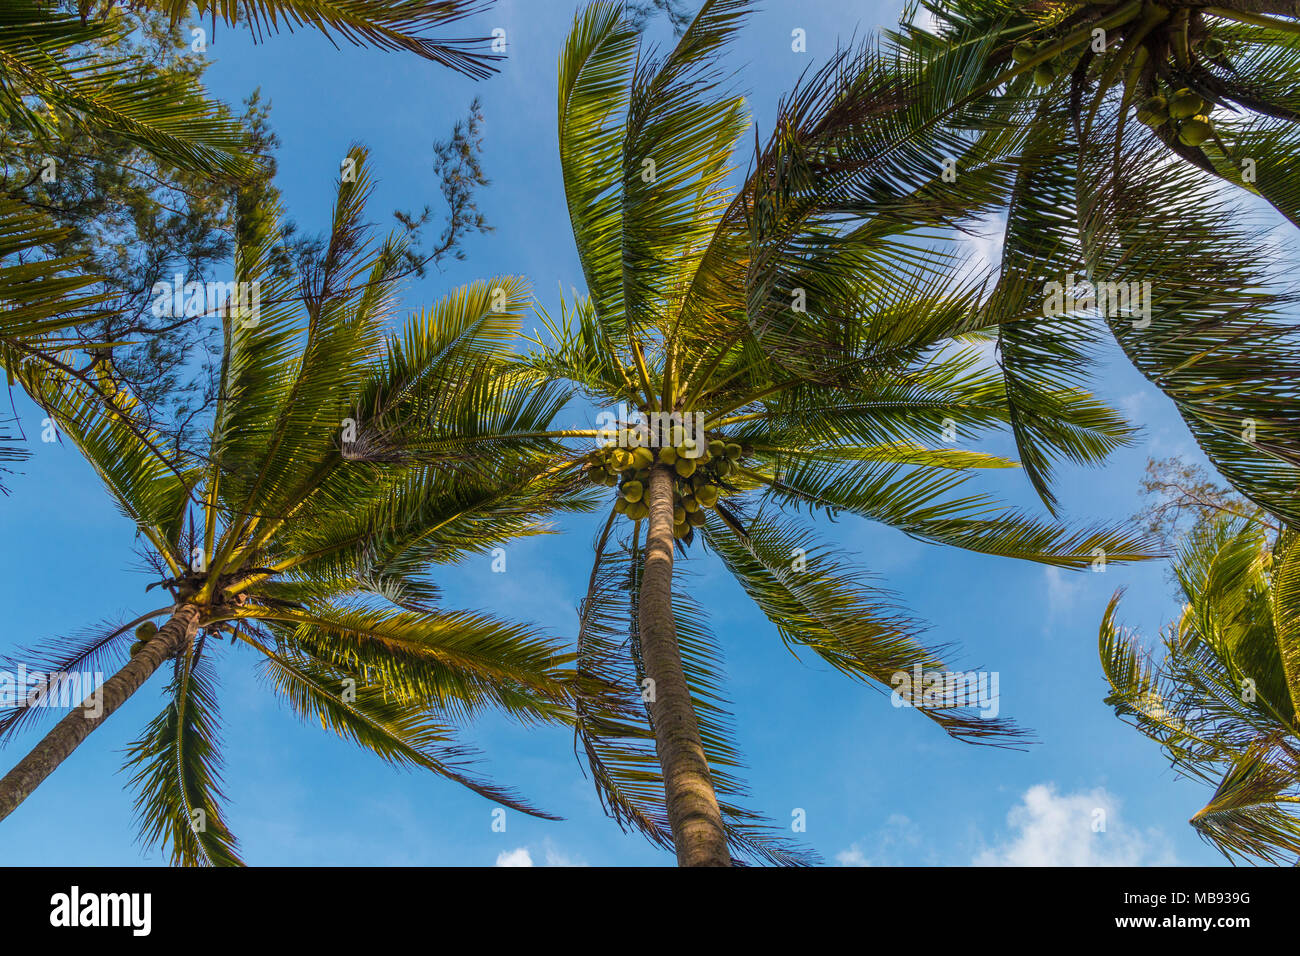 Coconut palms swaying in the warm, tropical climate of Terengganu, the eastern coast of Peninsular Malaysia. Stock Photo